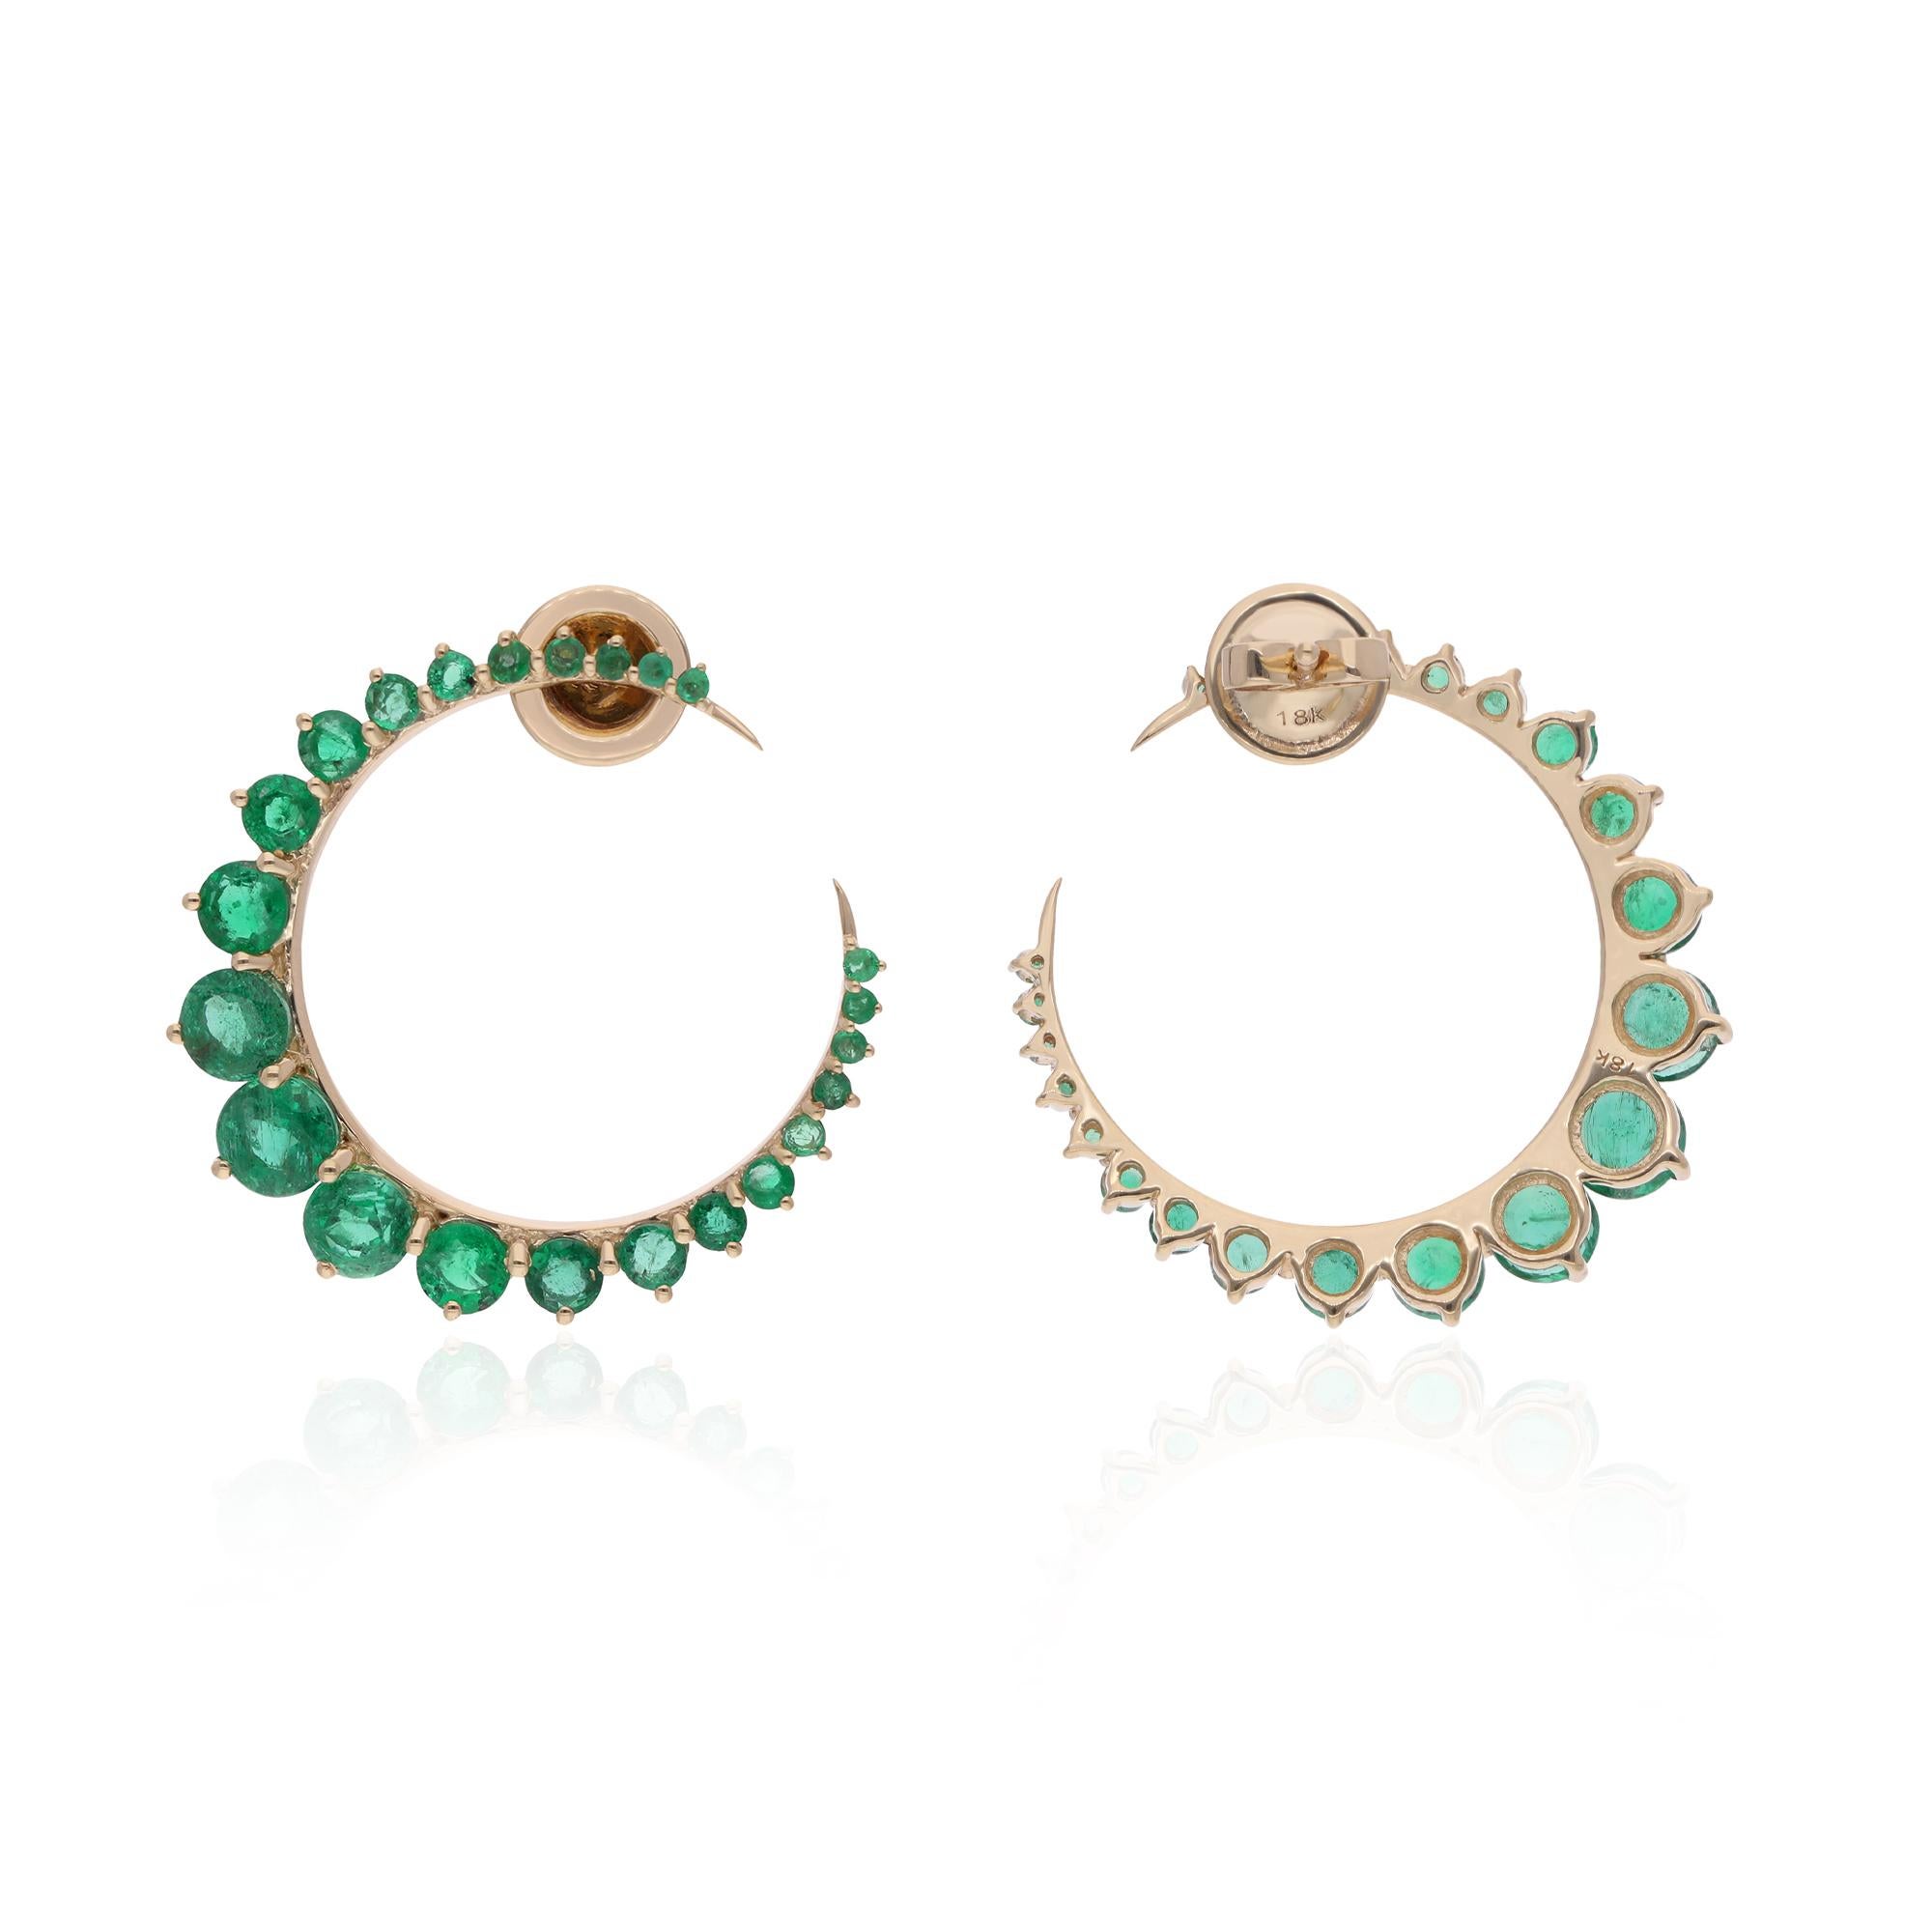 Illuminate your style with the celestial beauty of these Real Zambian Emerald Gemstone Crescent Moon Earrings, meticulously crafted in 18 karat solid yellow gold. Each detail of these earrings radiates sophistication and charm, making them a